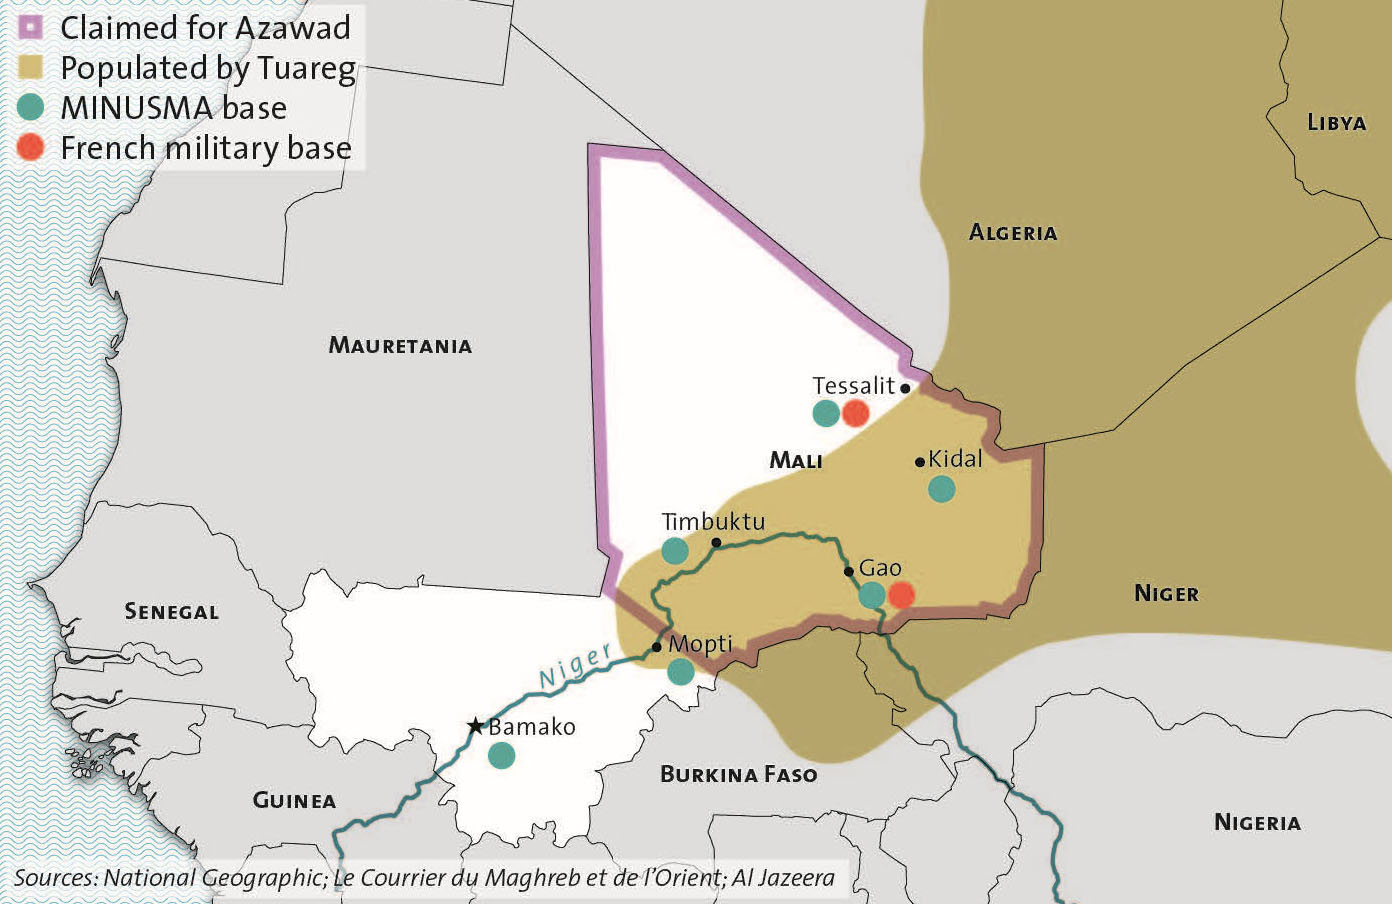 Mapping the conflict in Mali